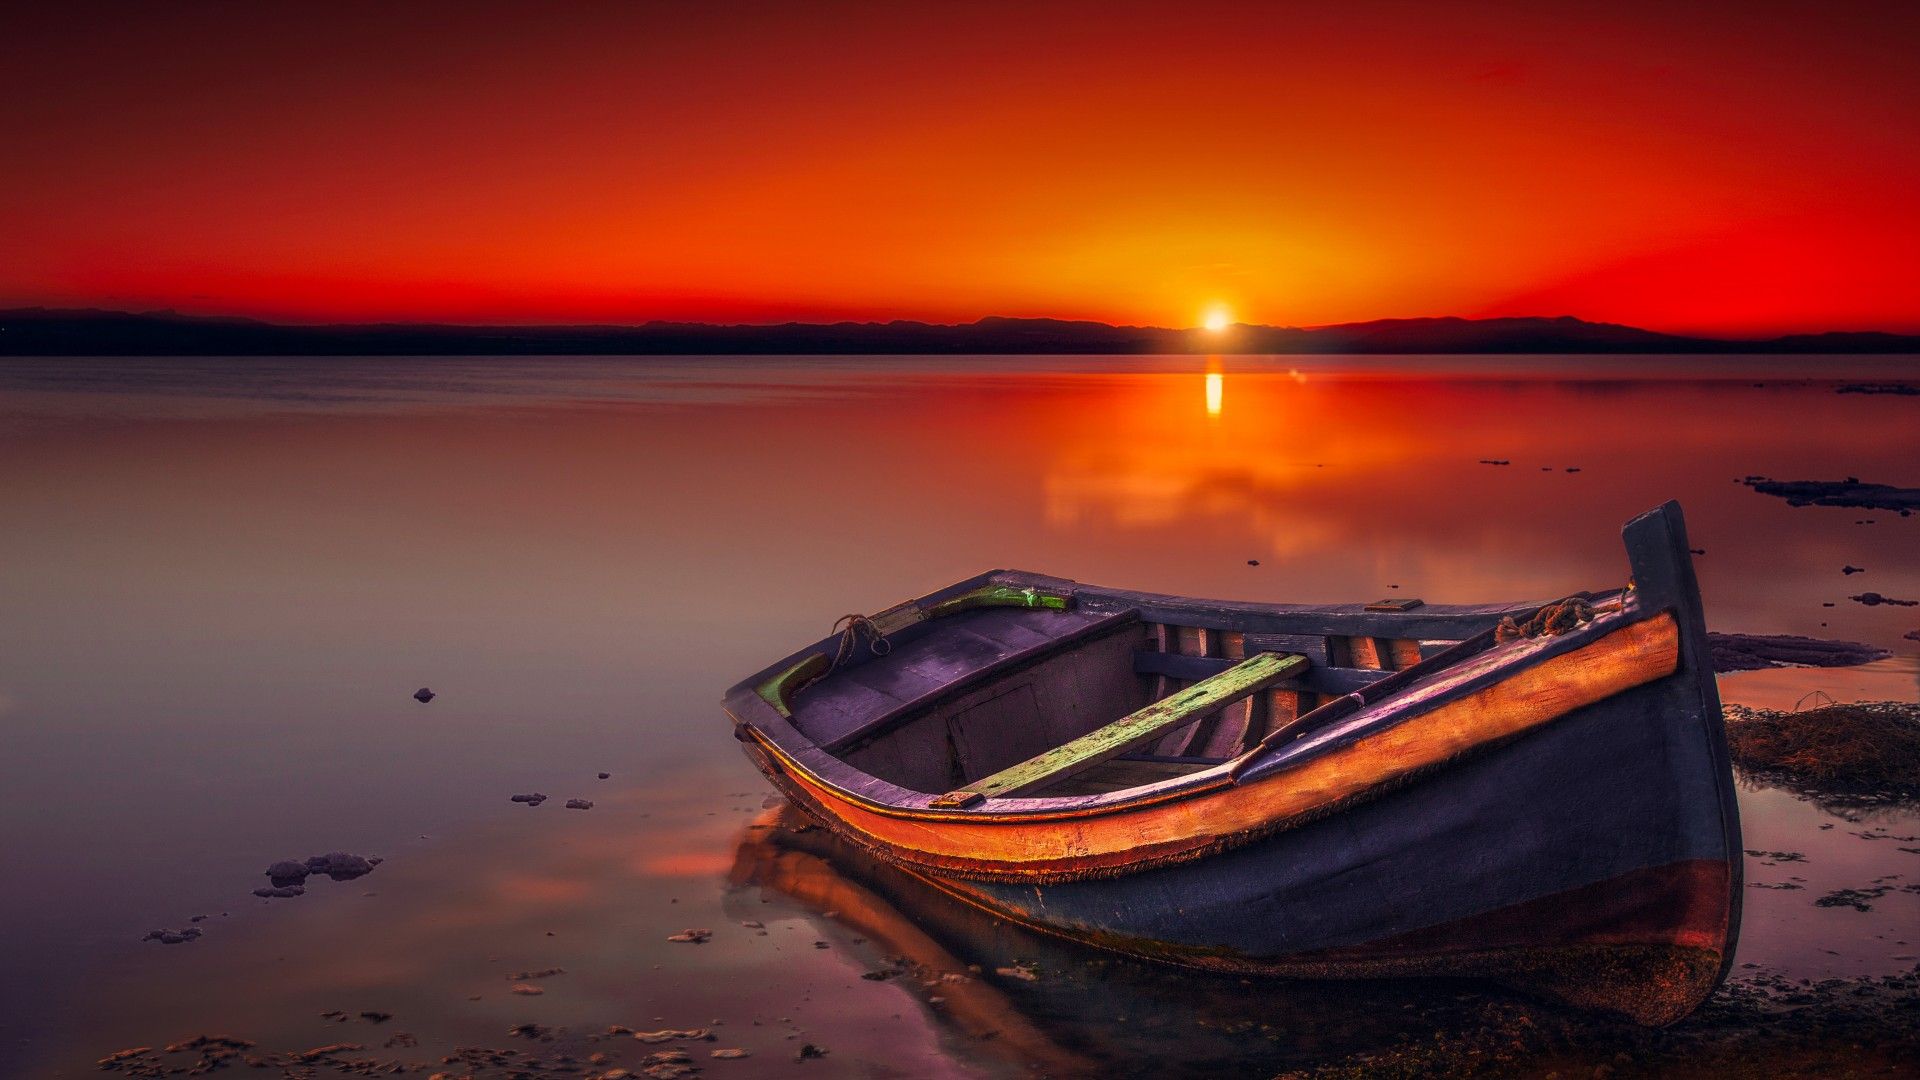 Sunset Beach With Boat - HD Wallpaper 